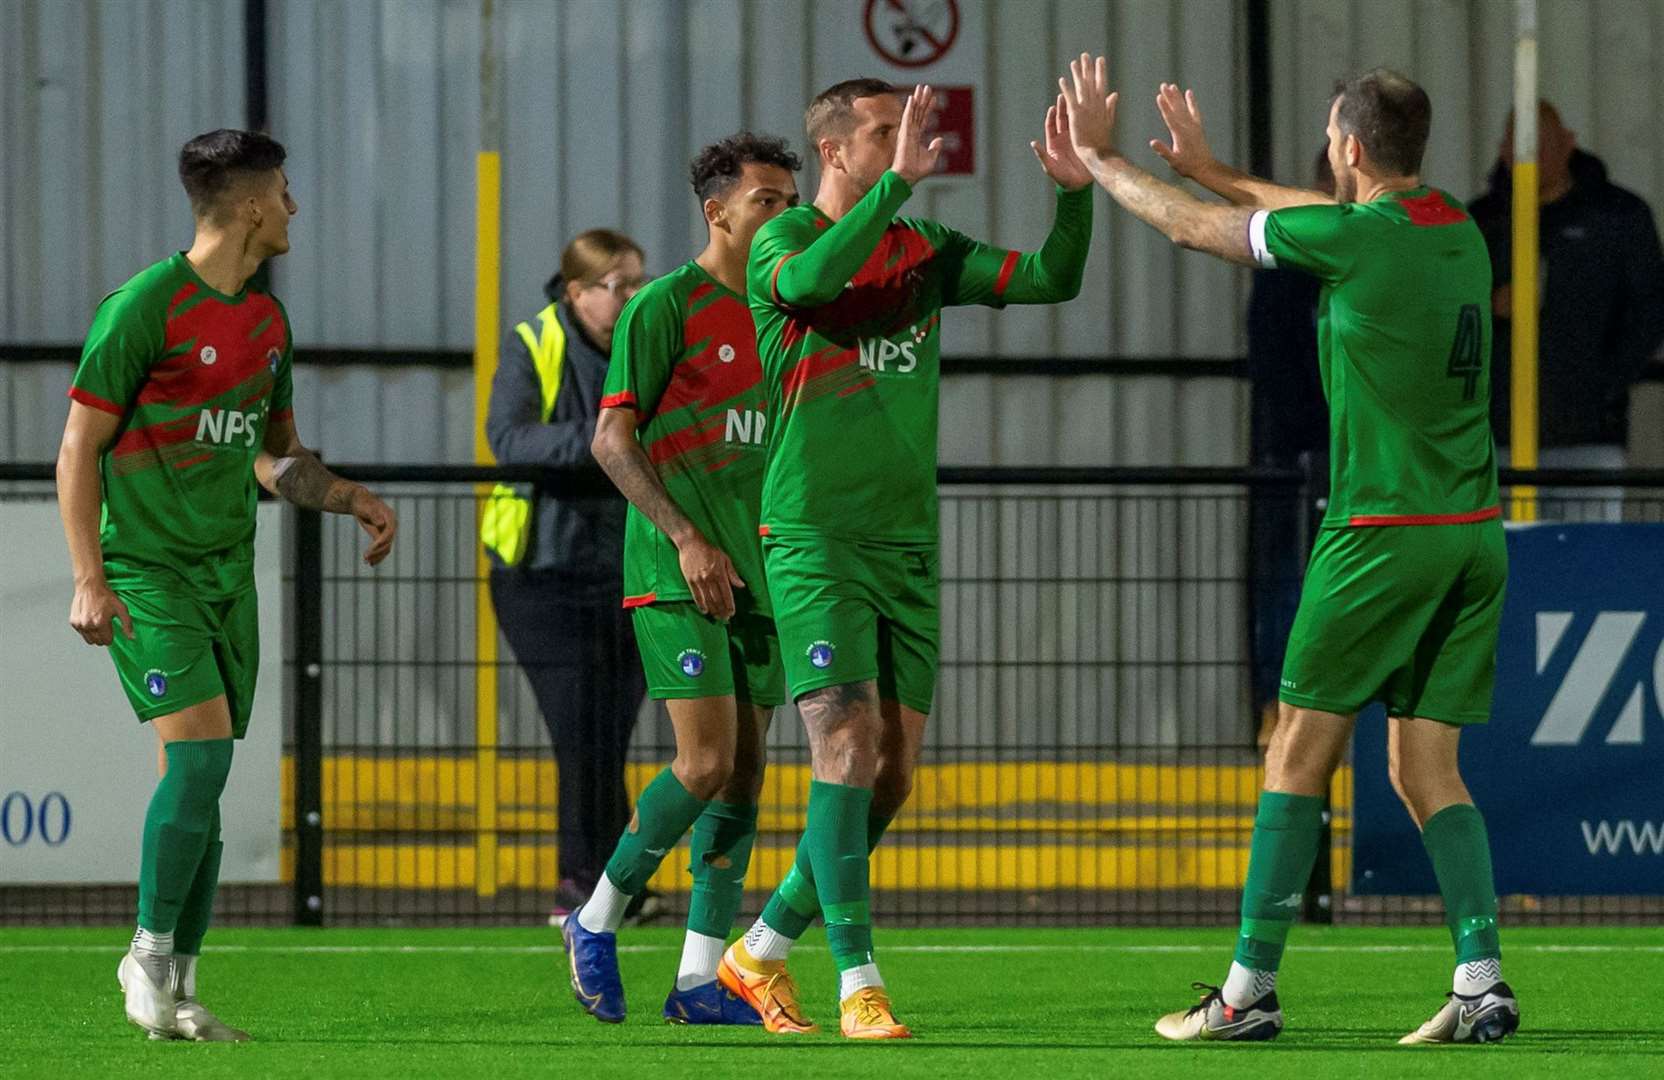 Lydd Town celebrate one of their goals as they win 4-2 at Faversham on Tuesday to complete a Southern Counties East Premier Division double over them. Picture: Ian Scammell